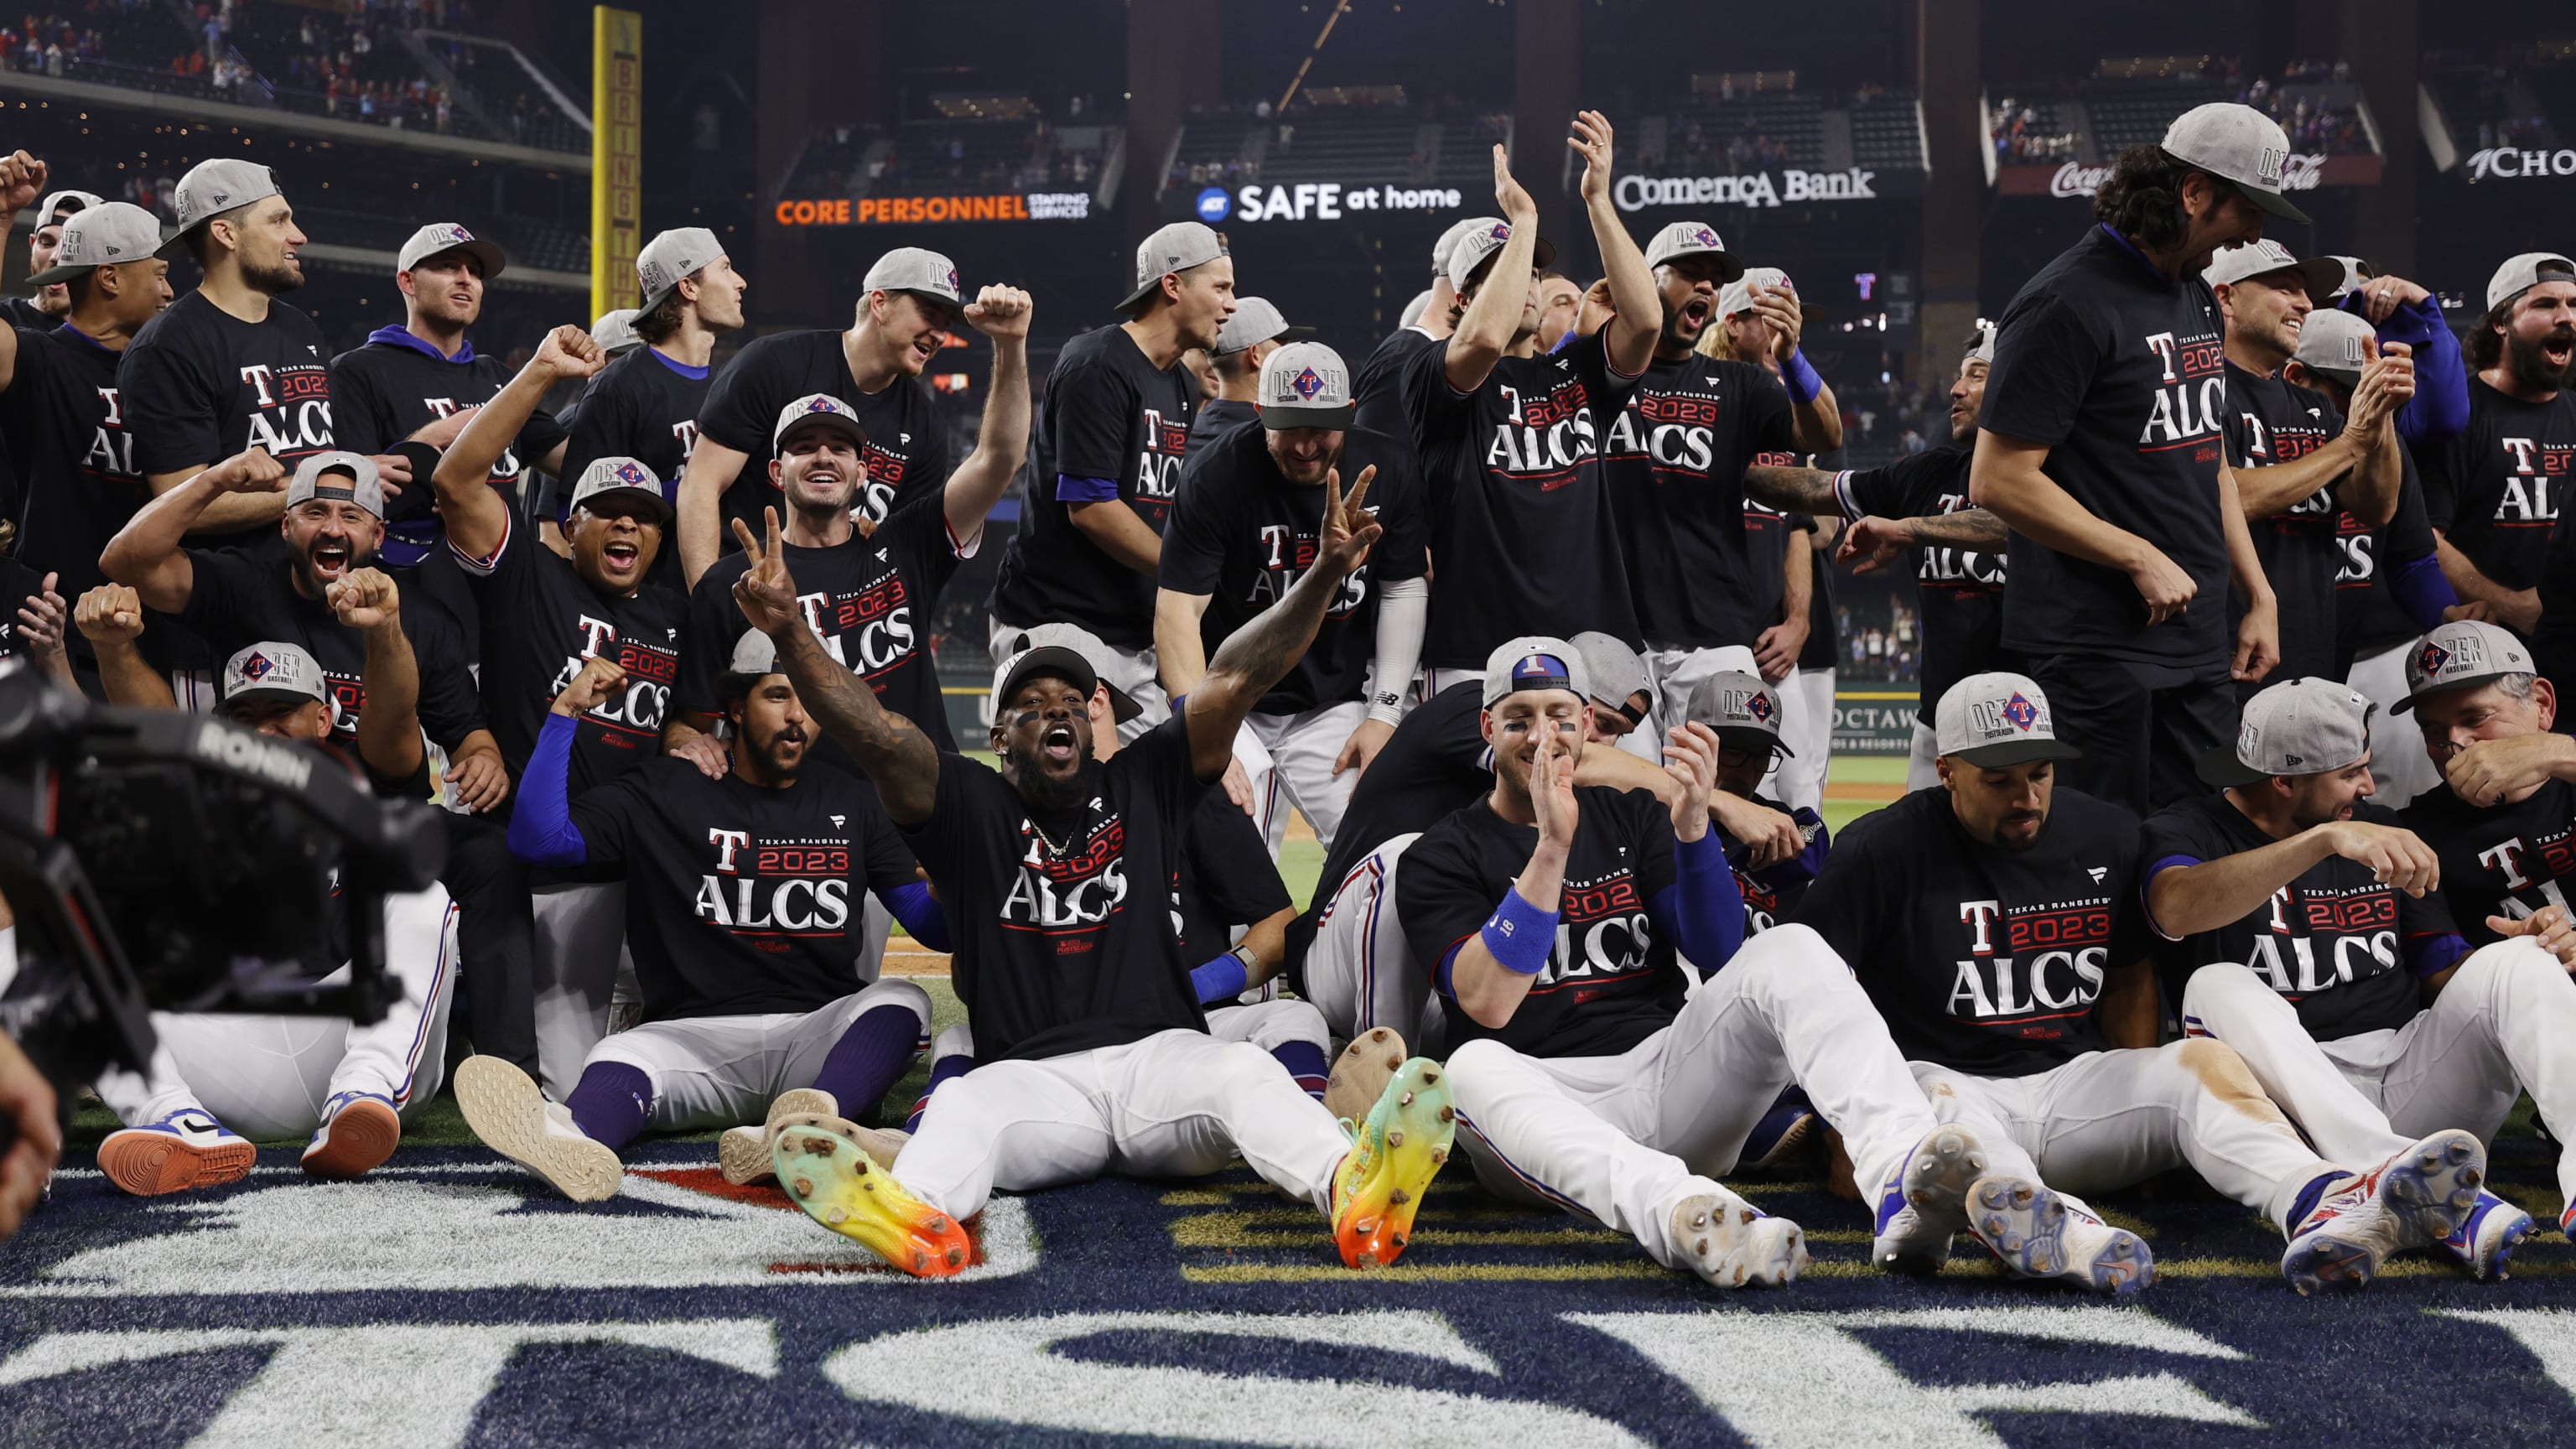 MLB playoffs: Rangers set up prospect of all-Texas ALCS by